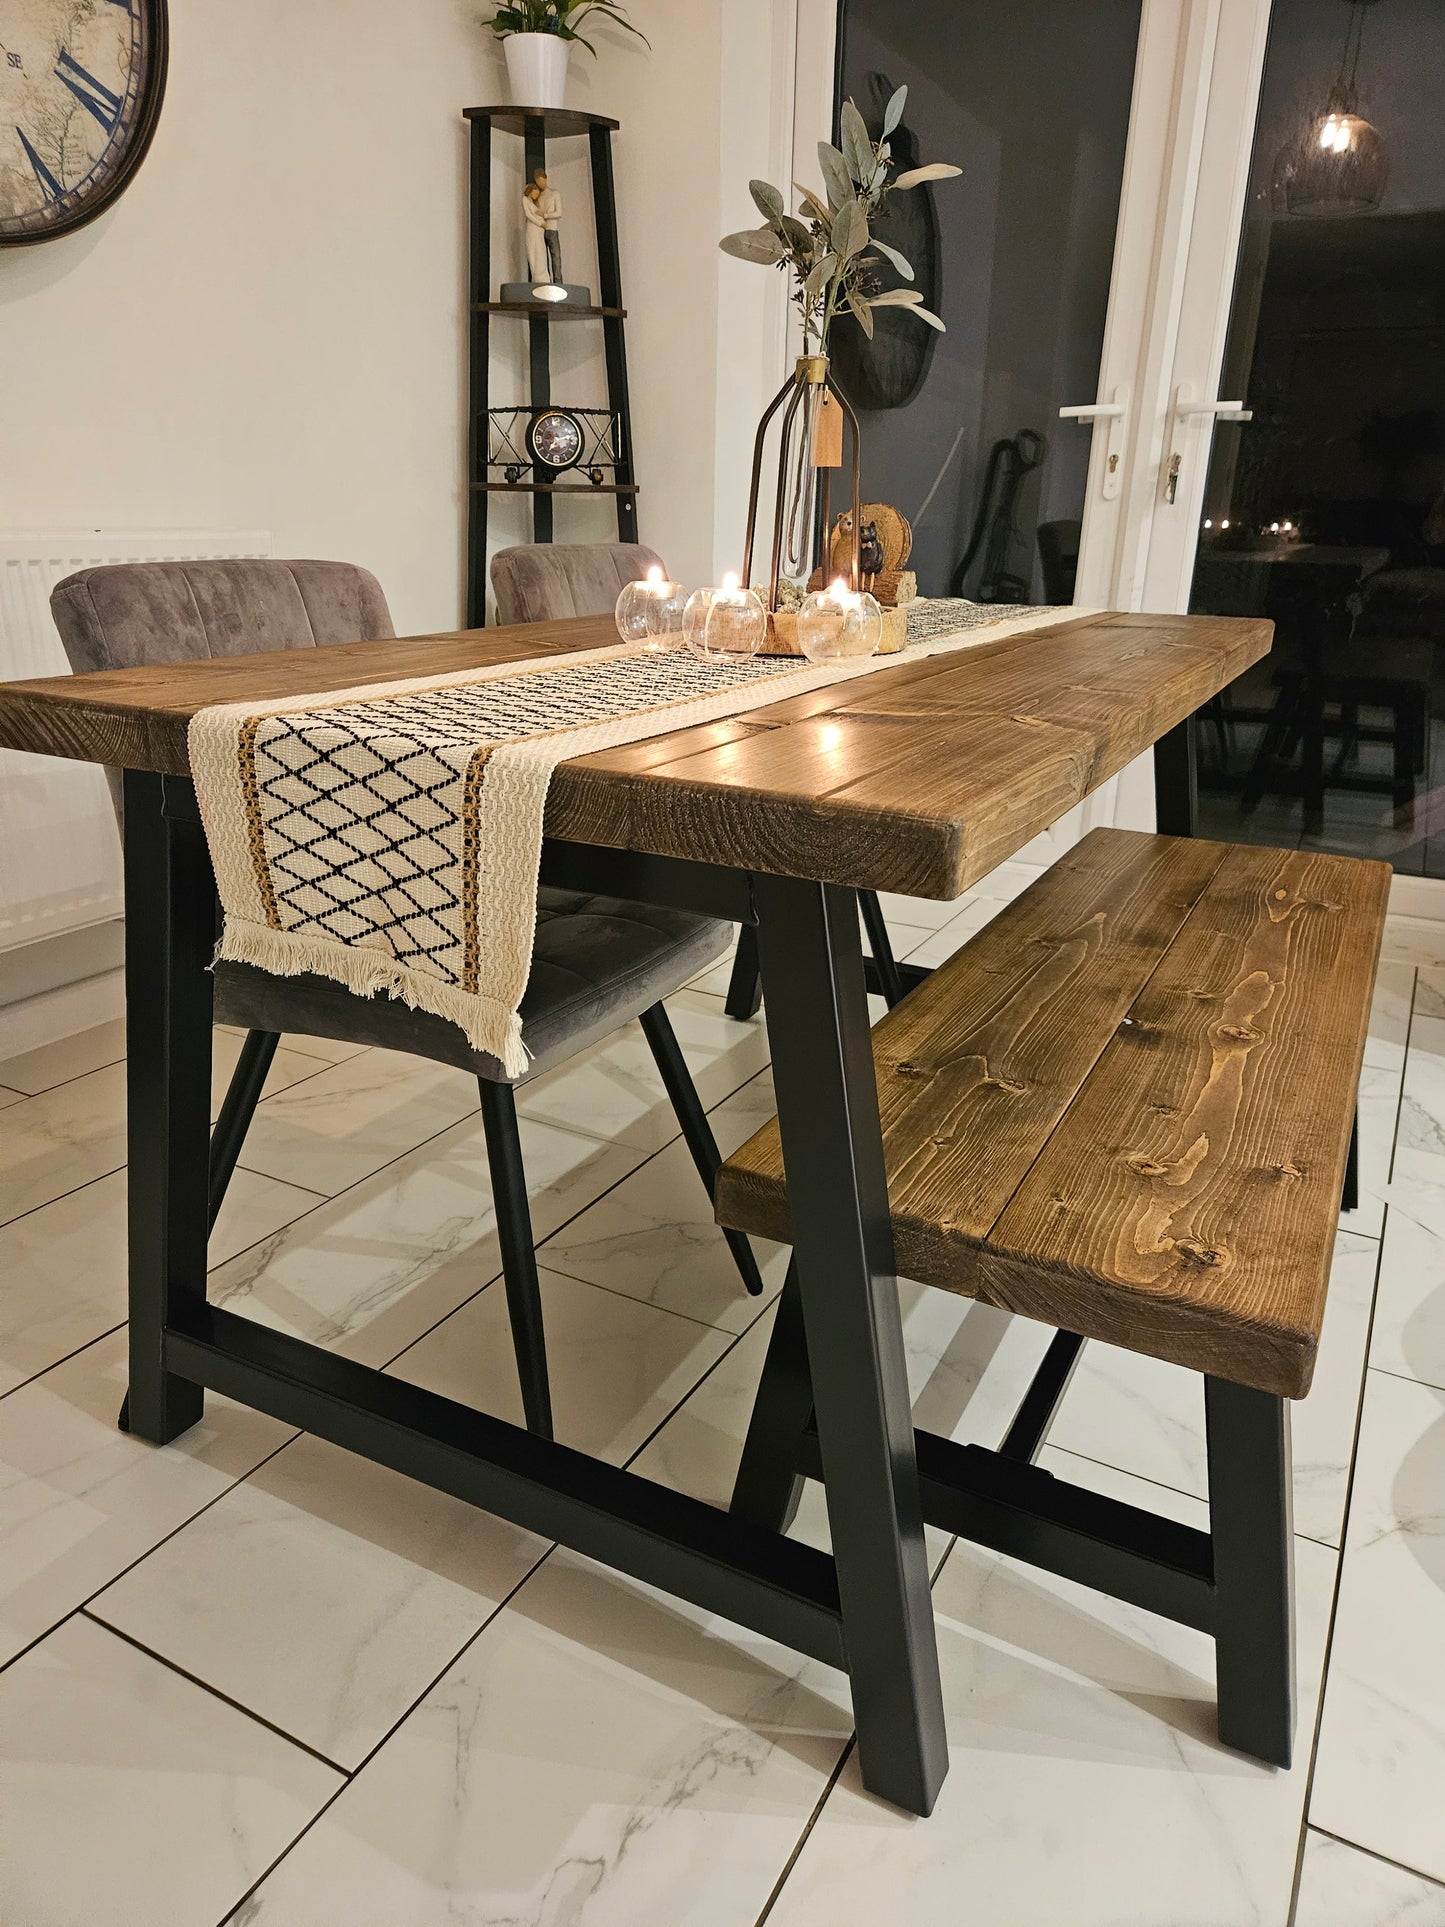 MAK Range A Frame Dining table with bench and 2 chairs